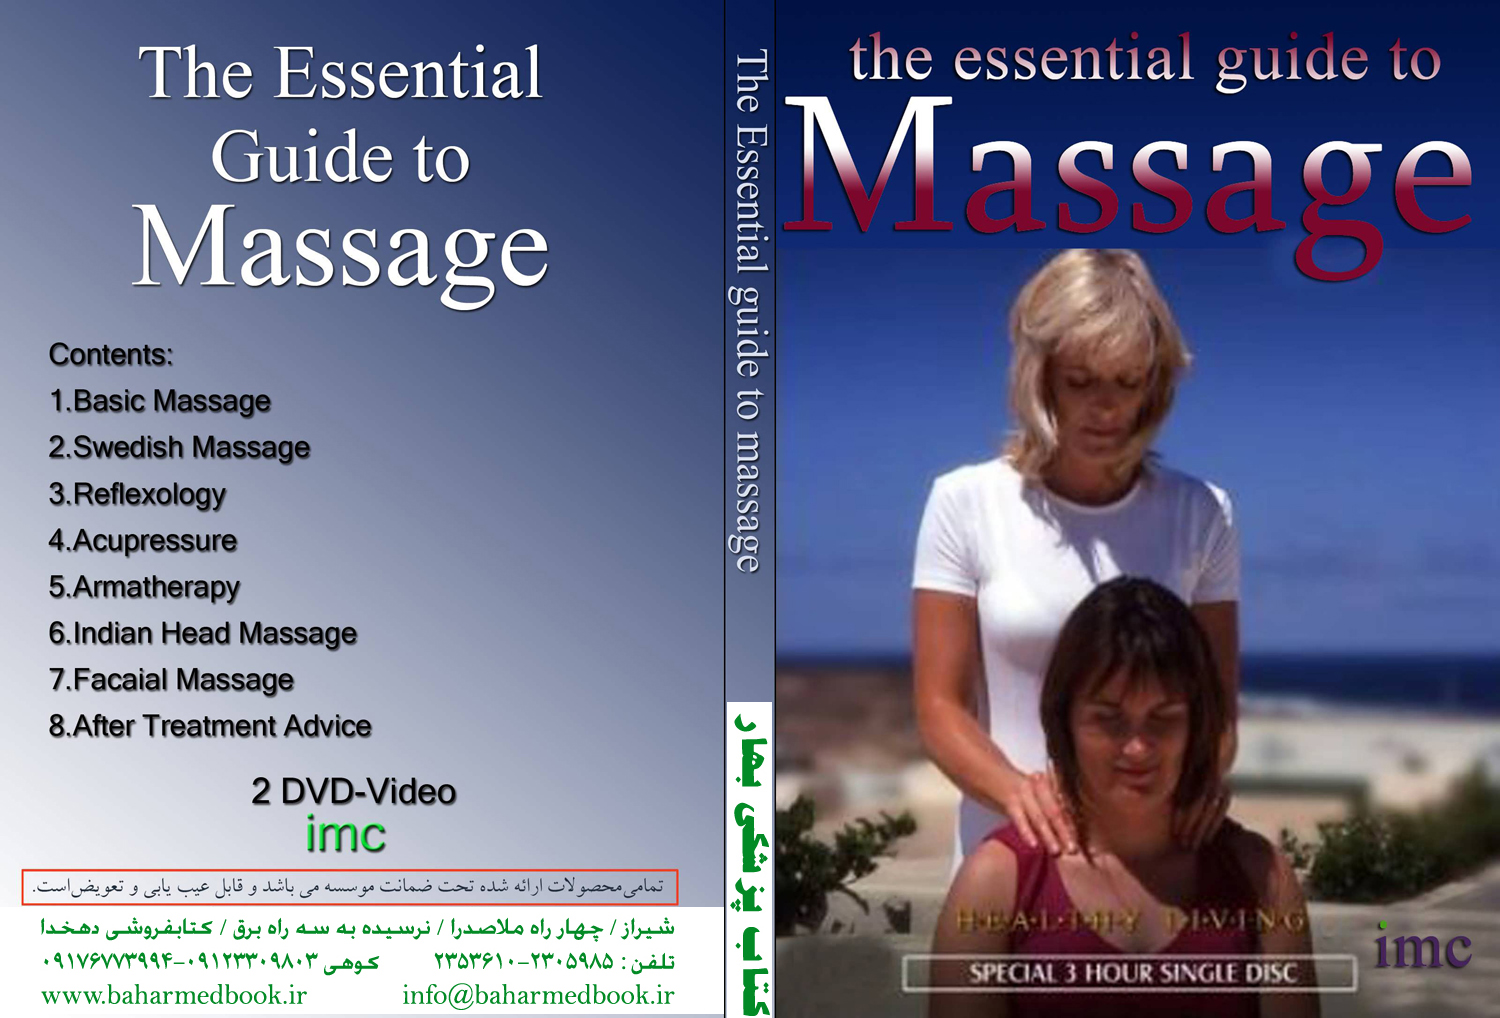 The Essential Guide To Massage Course Video At 8€ کتاب پزشکی بهار